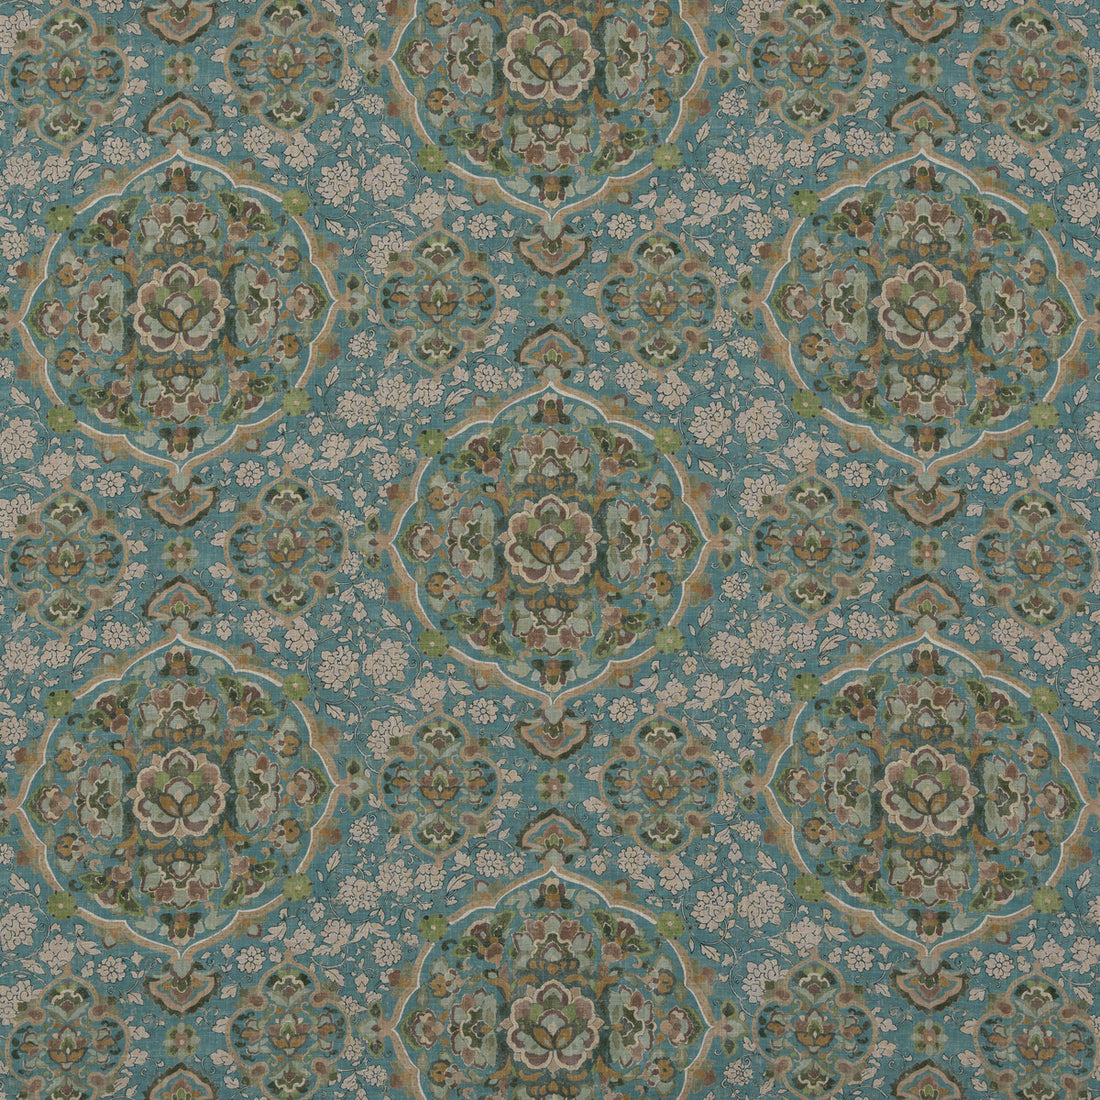 Kiana fabric in teal color - pattern BP10928.2.0 - by G P &amp; J Baker in the Caspian collection